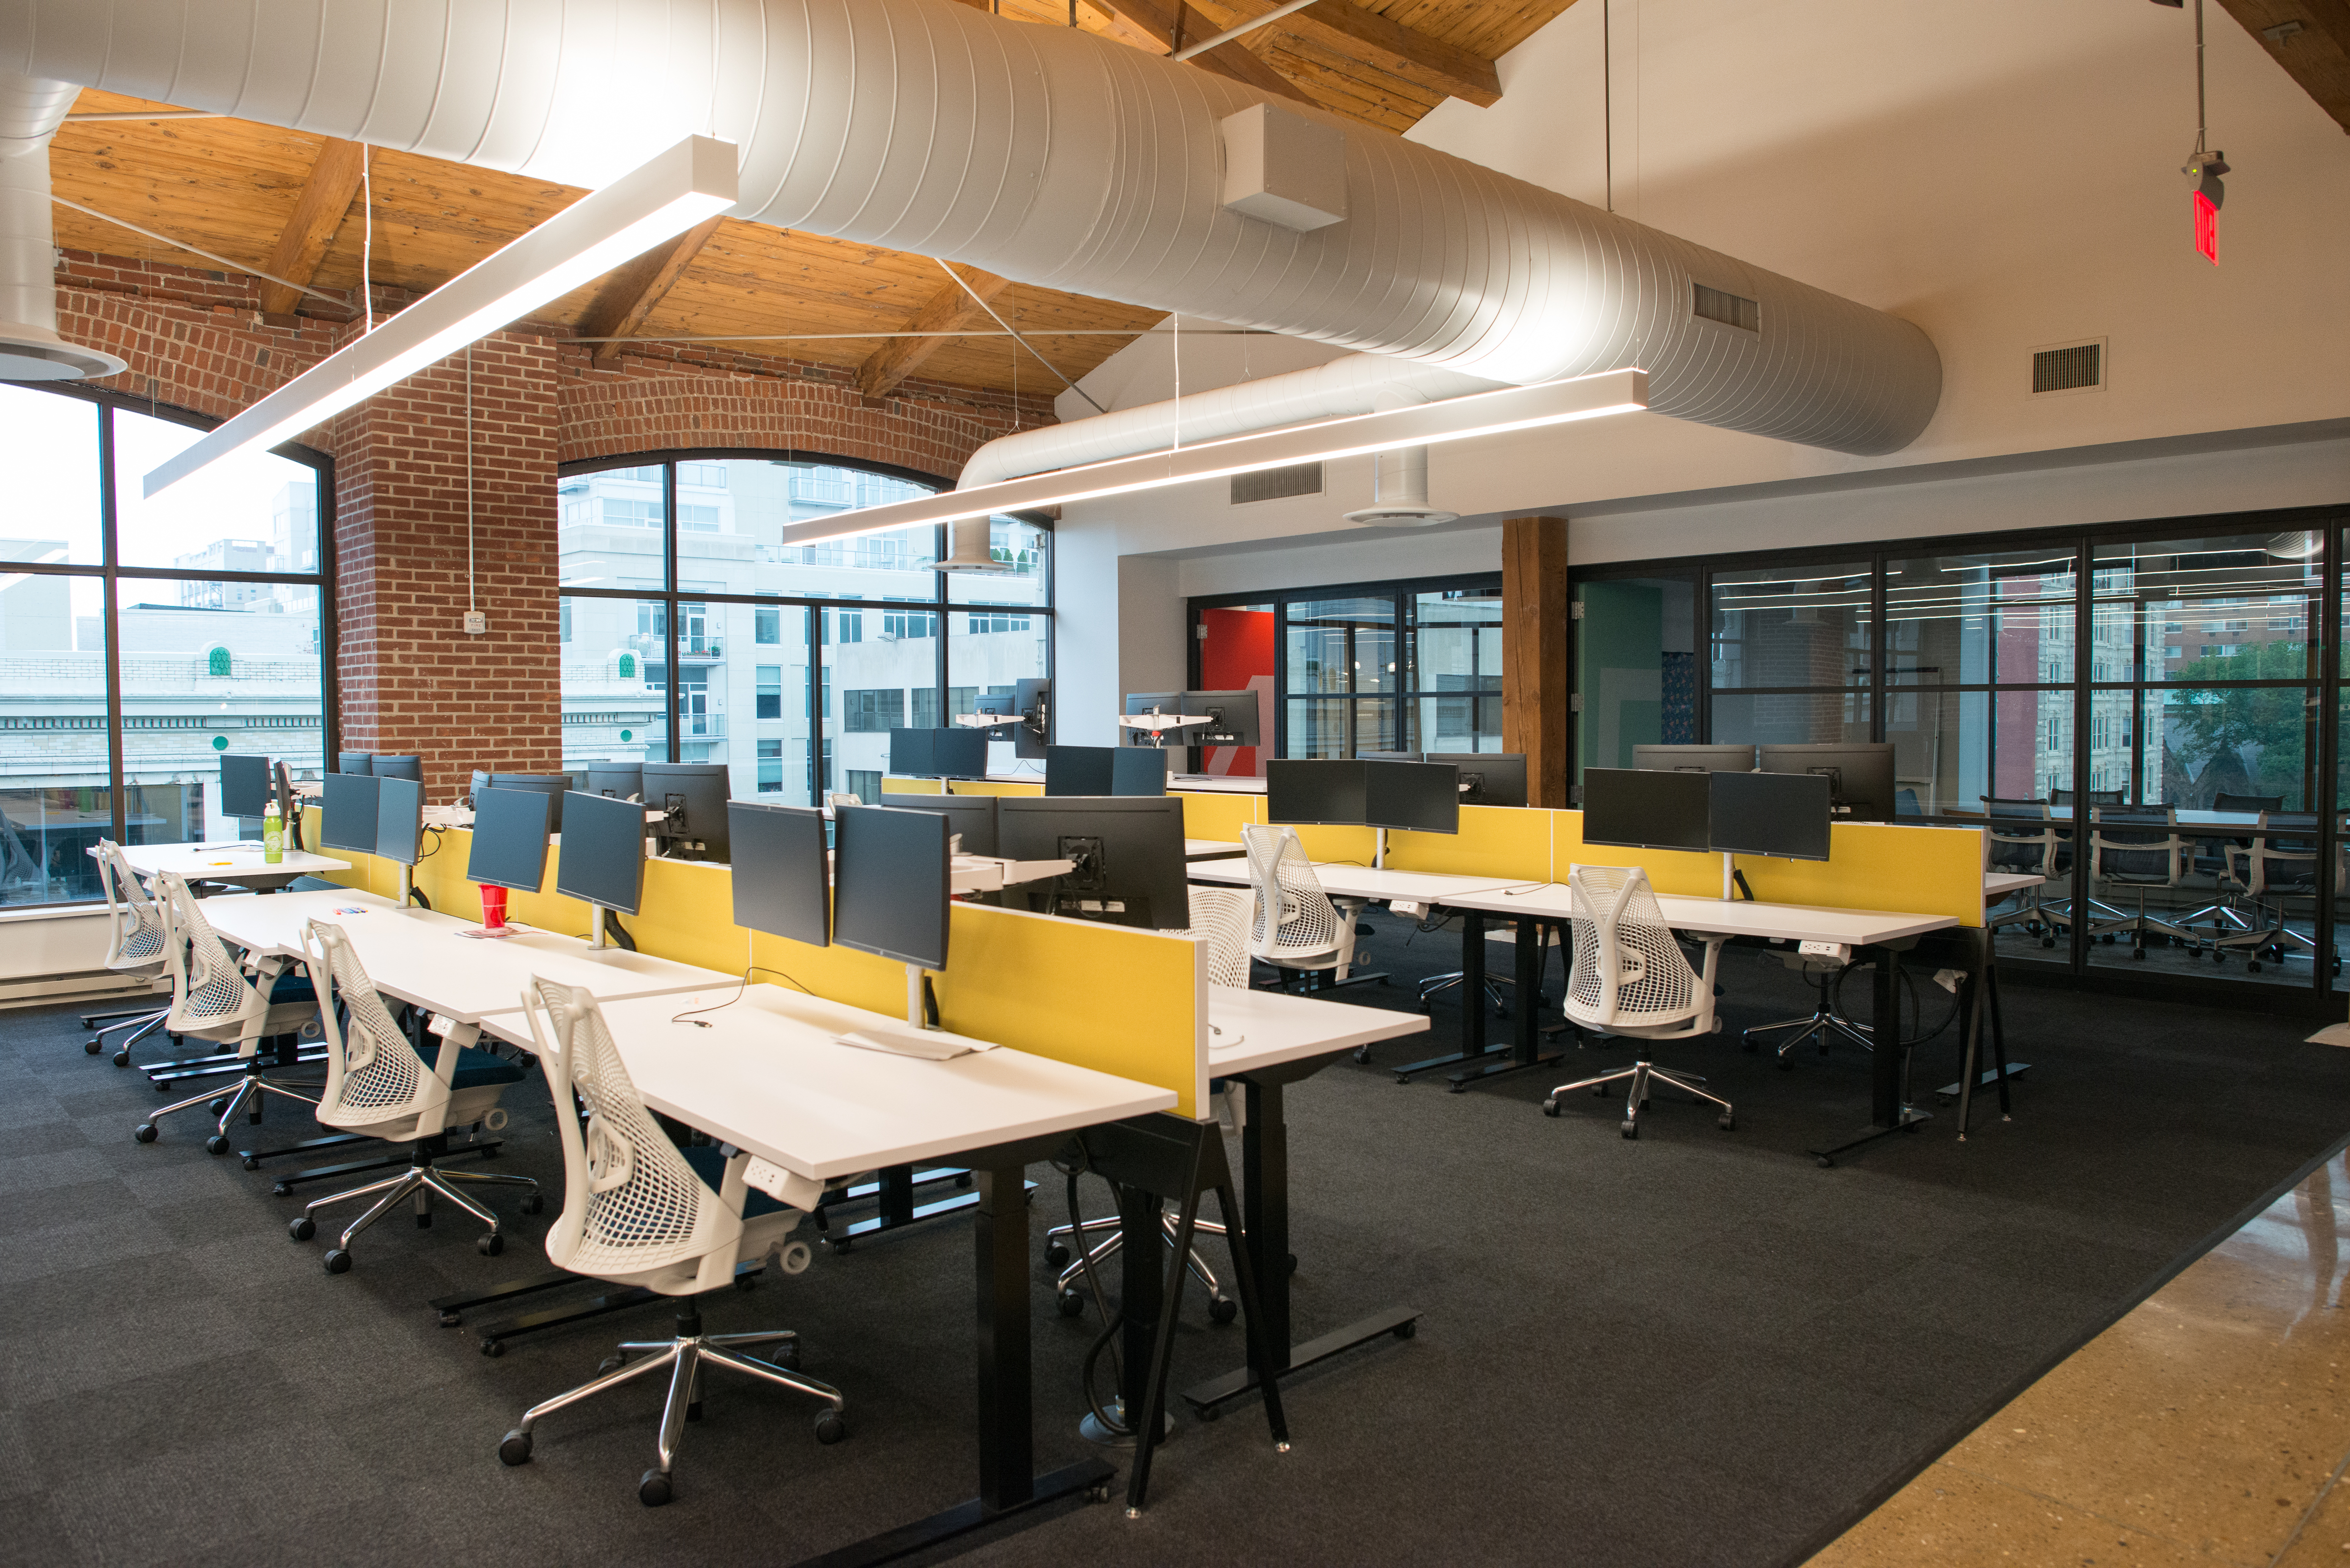 Open-Plan Offices vs Cubicles? Pros and Cons